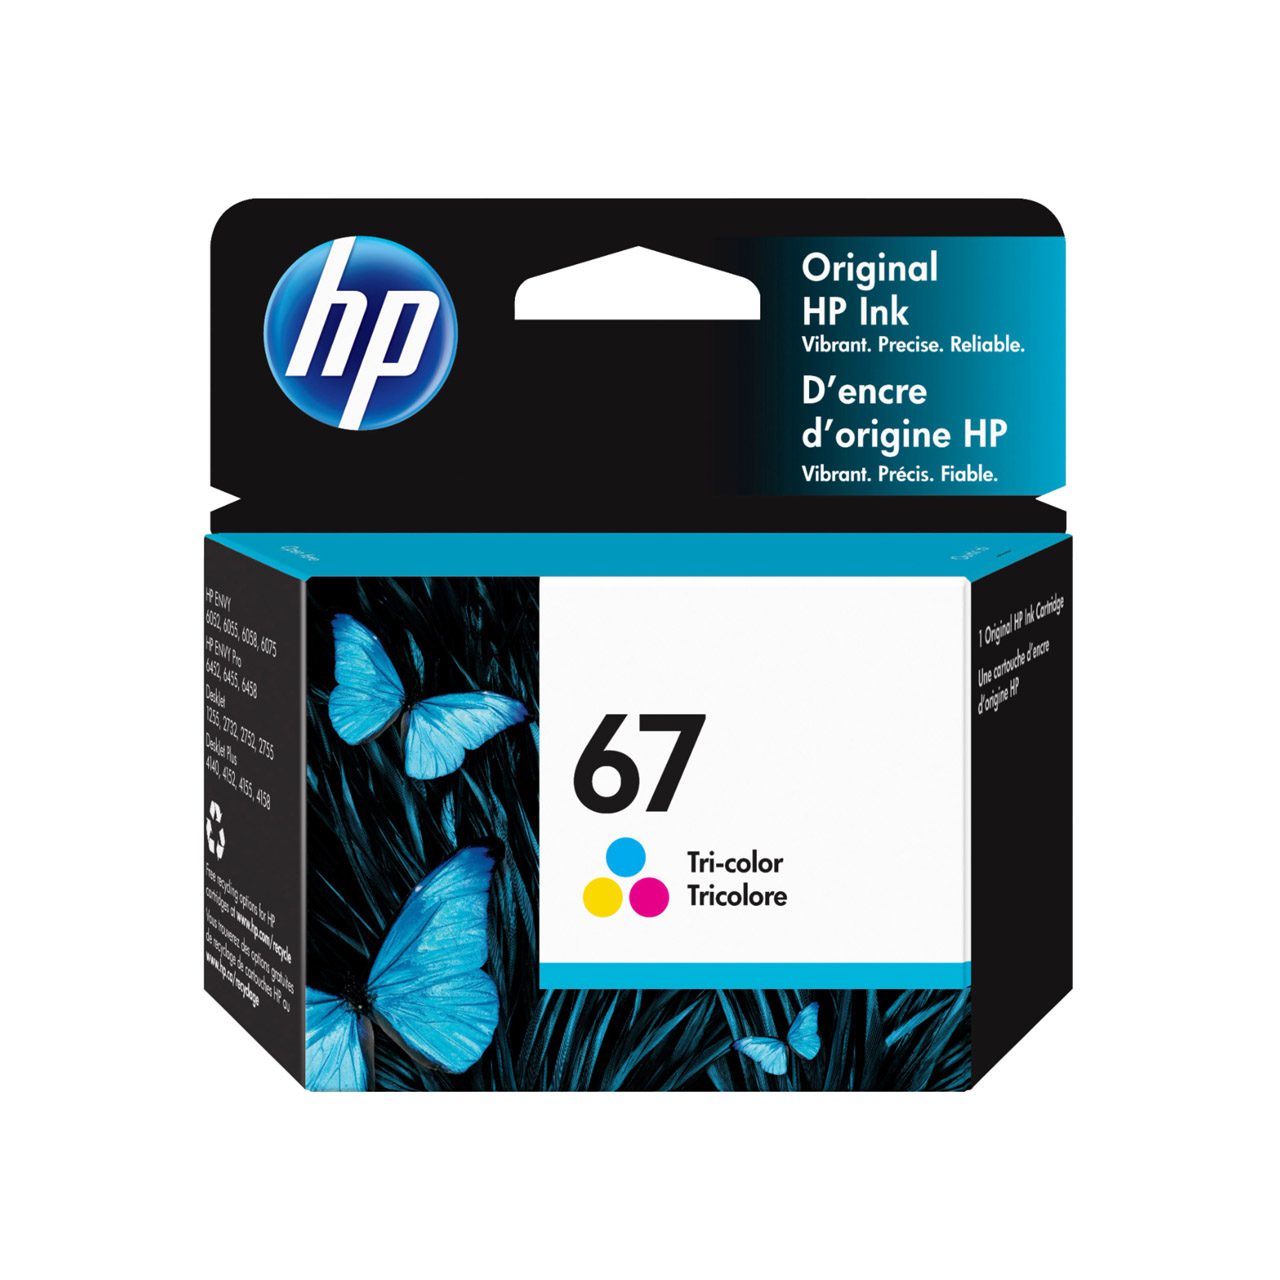 HP 67 Tricolor Cartridge | HP Catridges | OfficeSupplies